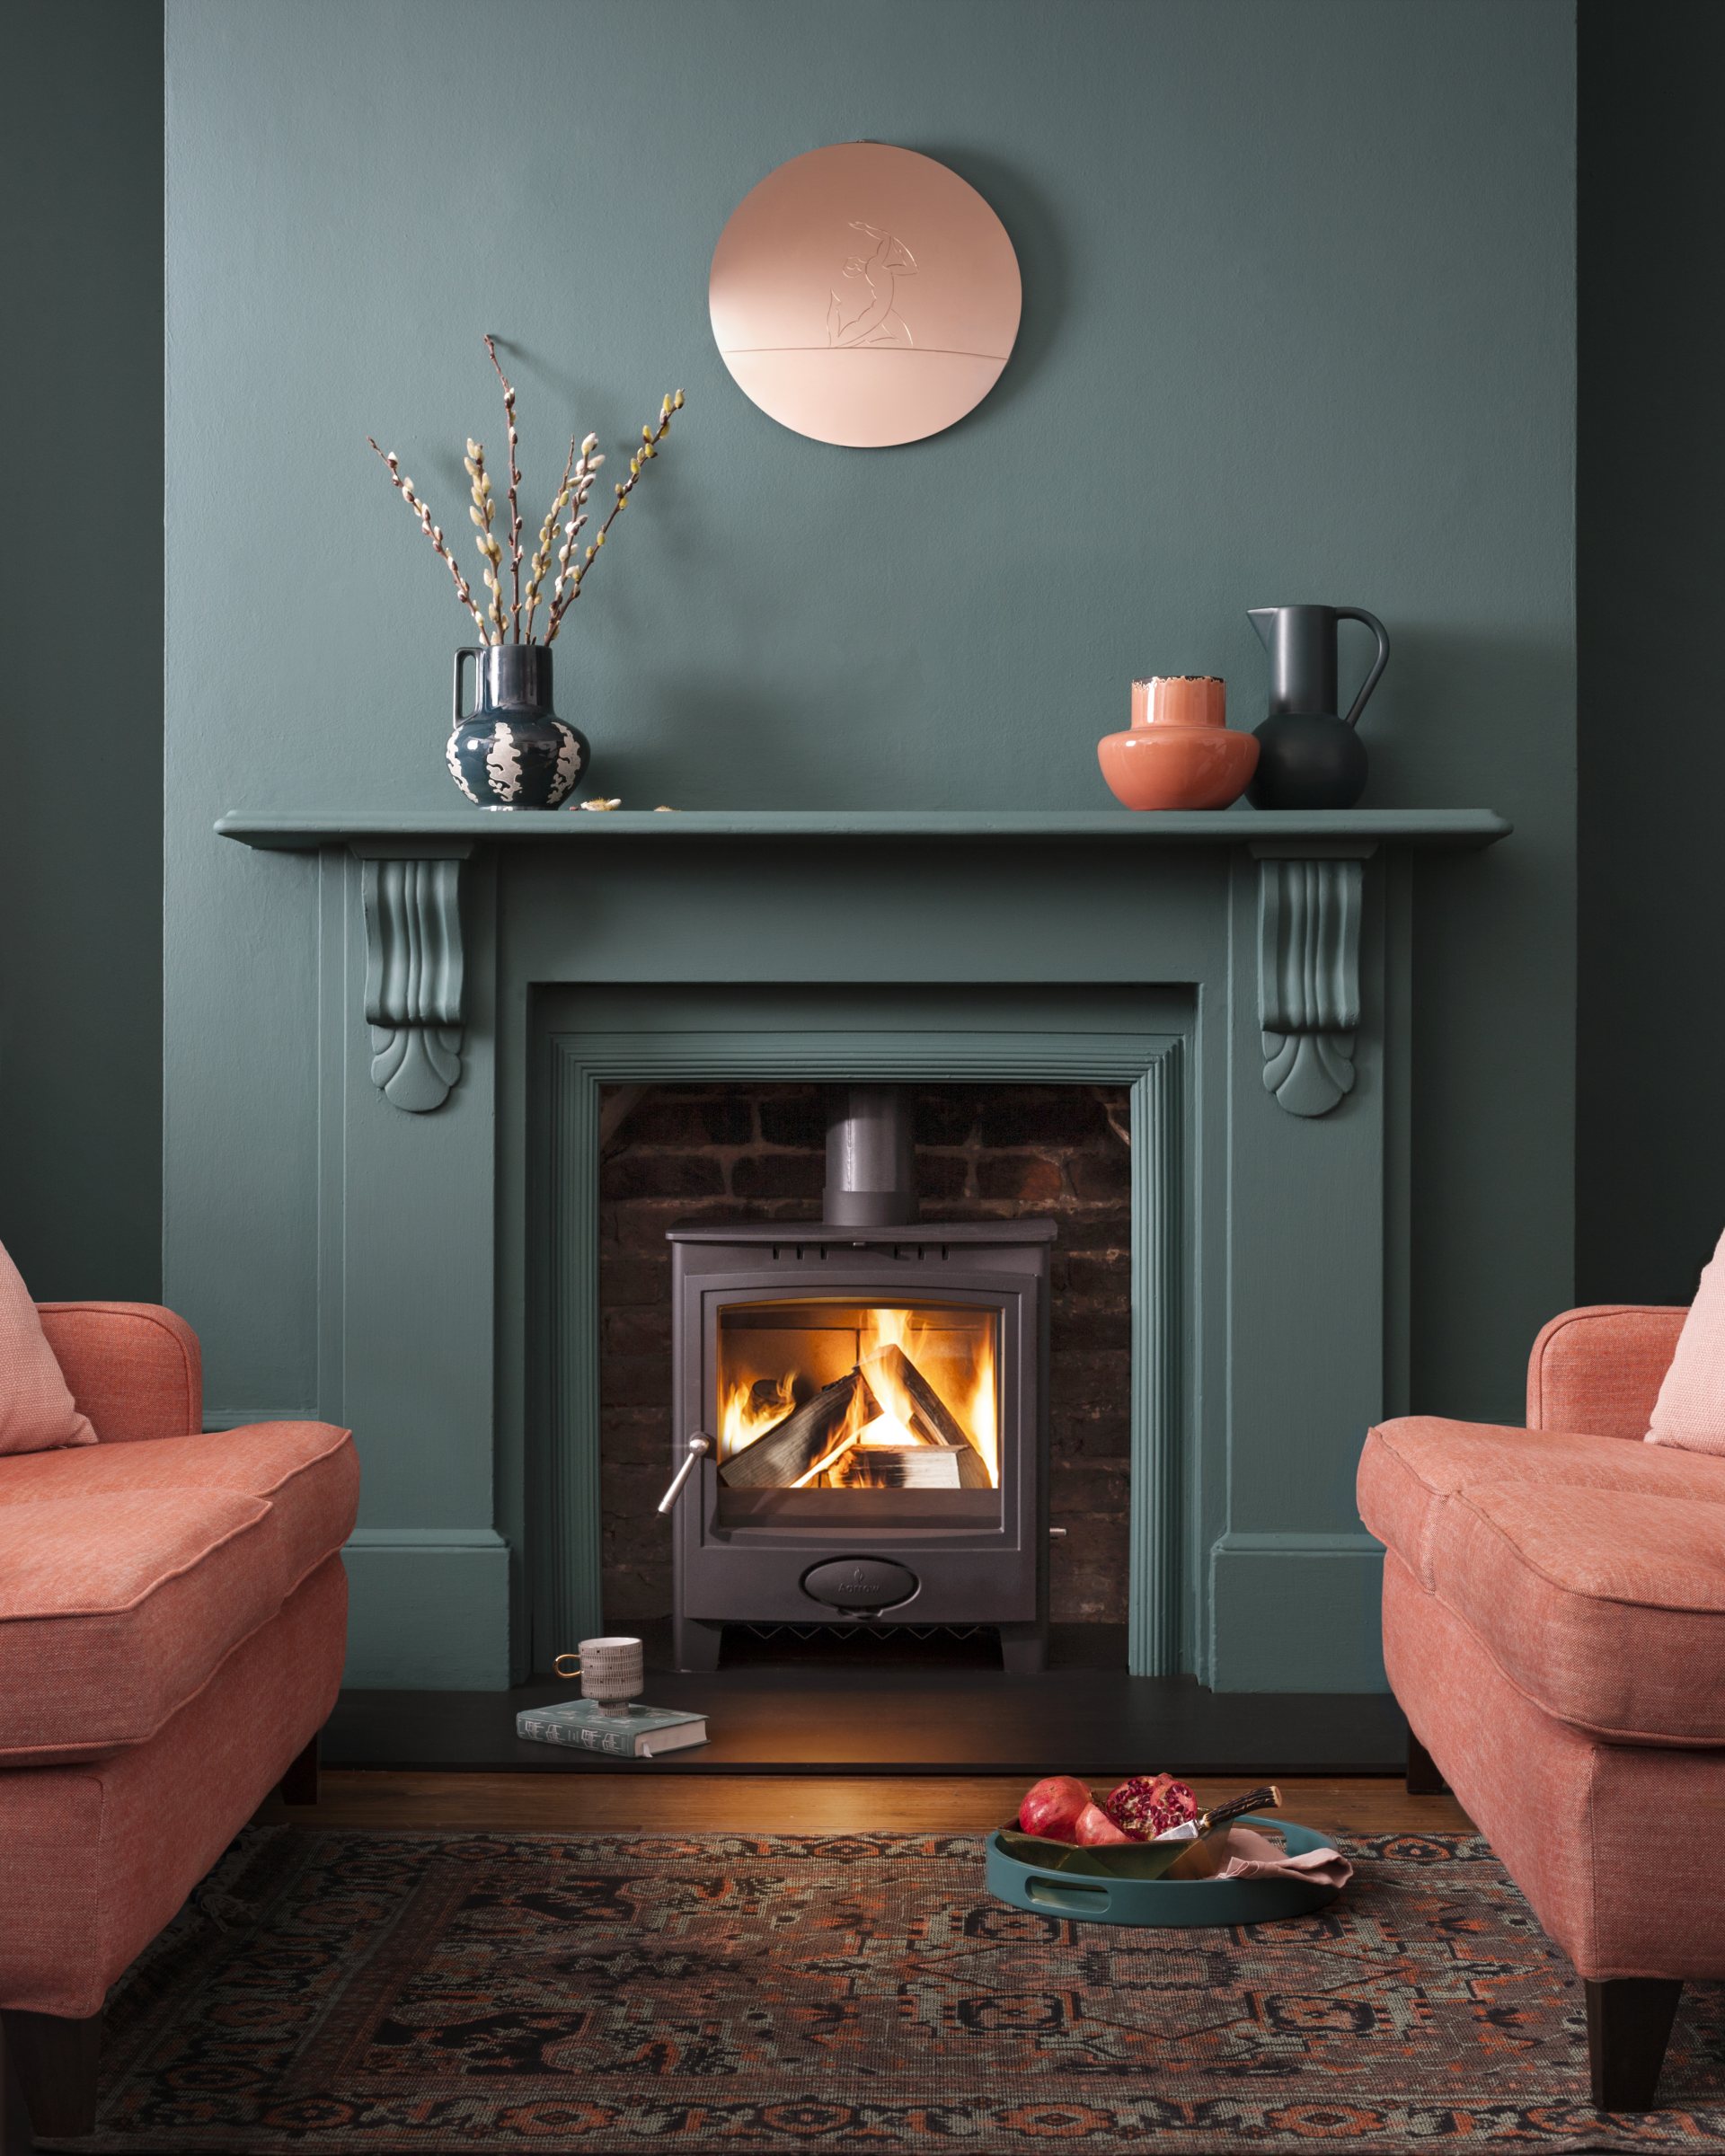 Ecoburn Plus 5 Widescreen stove in lit in fireplace in modern room with green walls and peach-coloured sofa and armchair